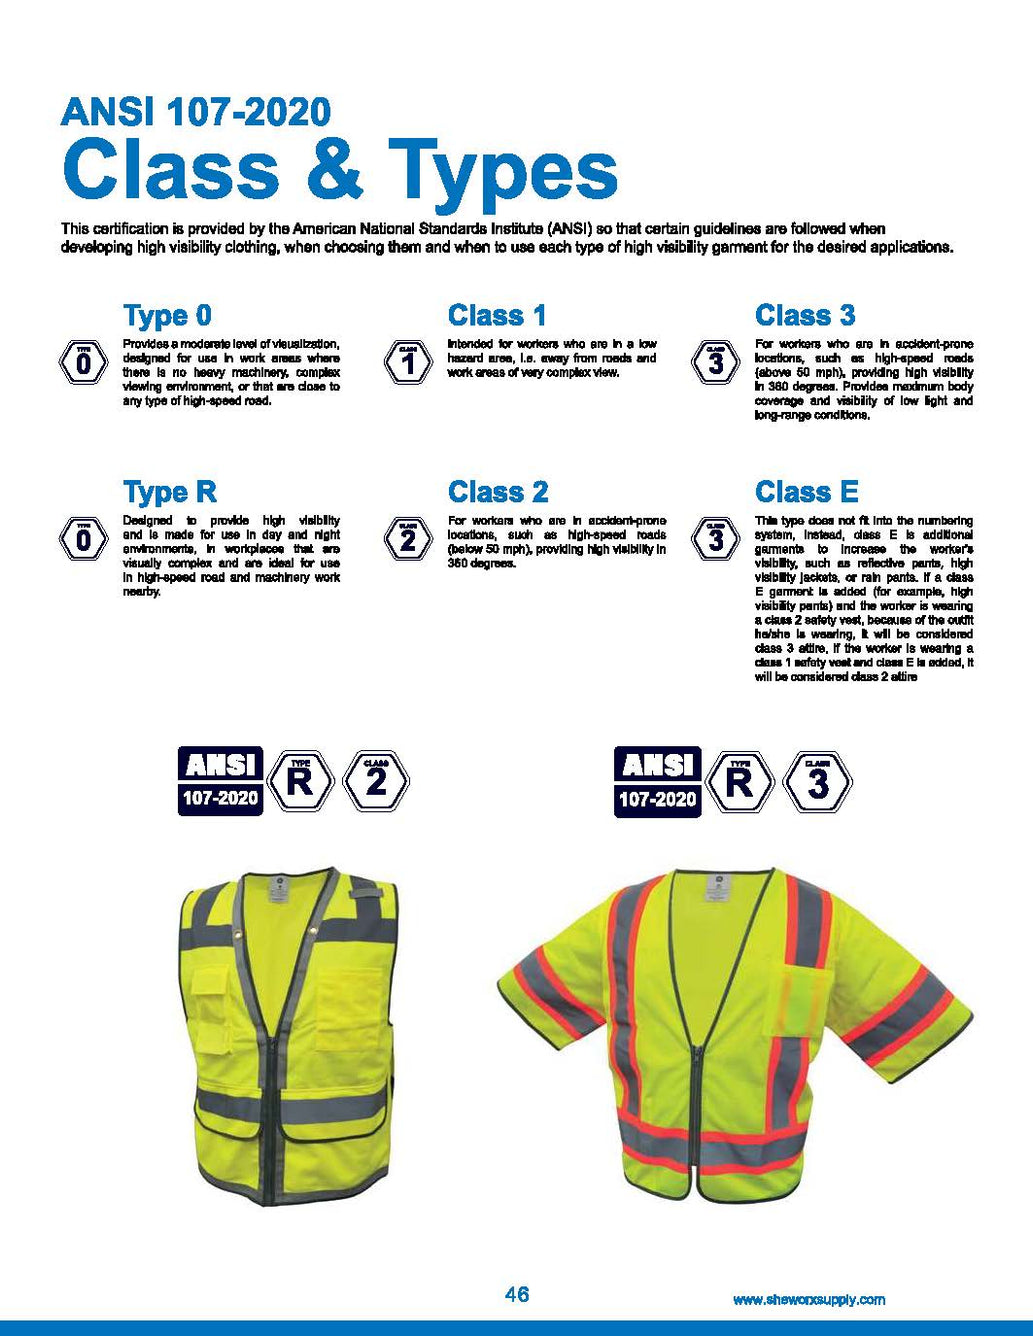 GE PPE - GV086 - Heavy Duty Engineer Vest with Contrasting Trims